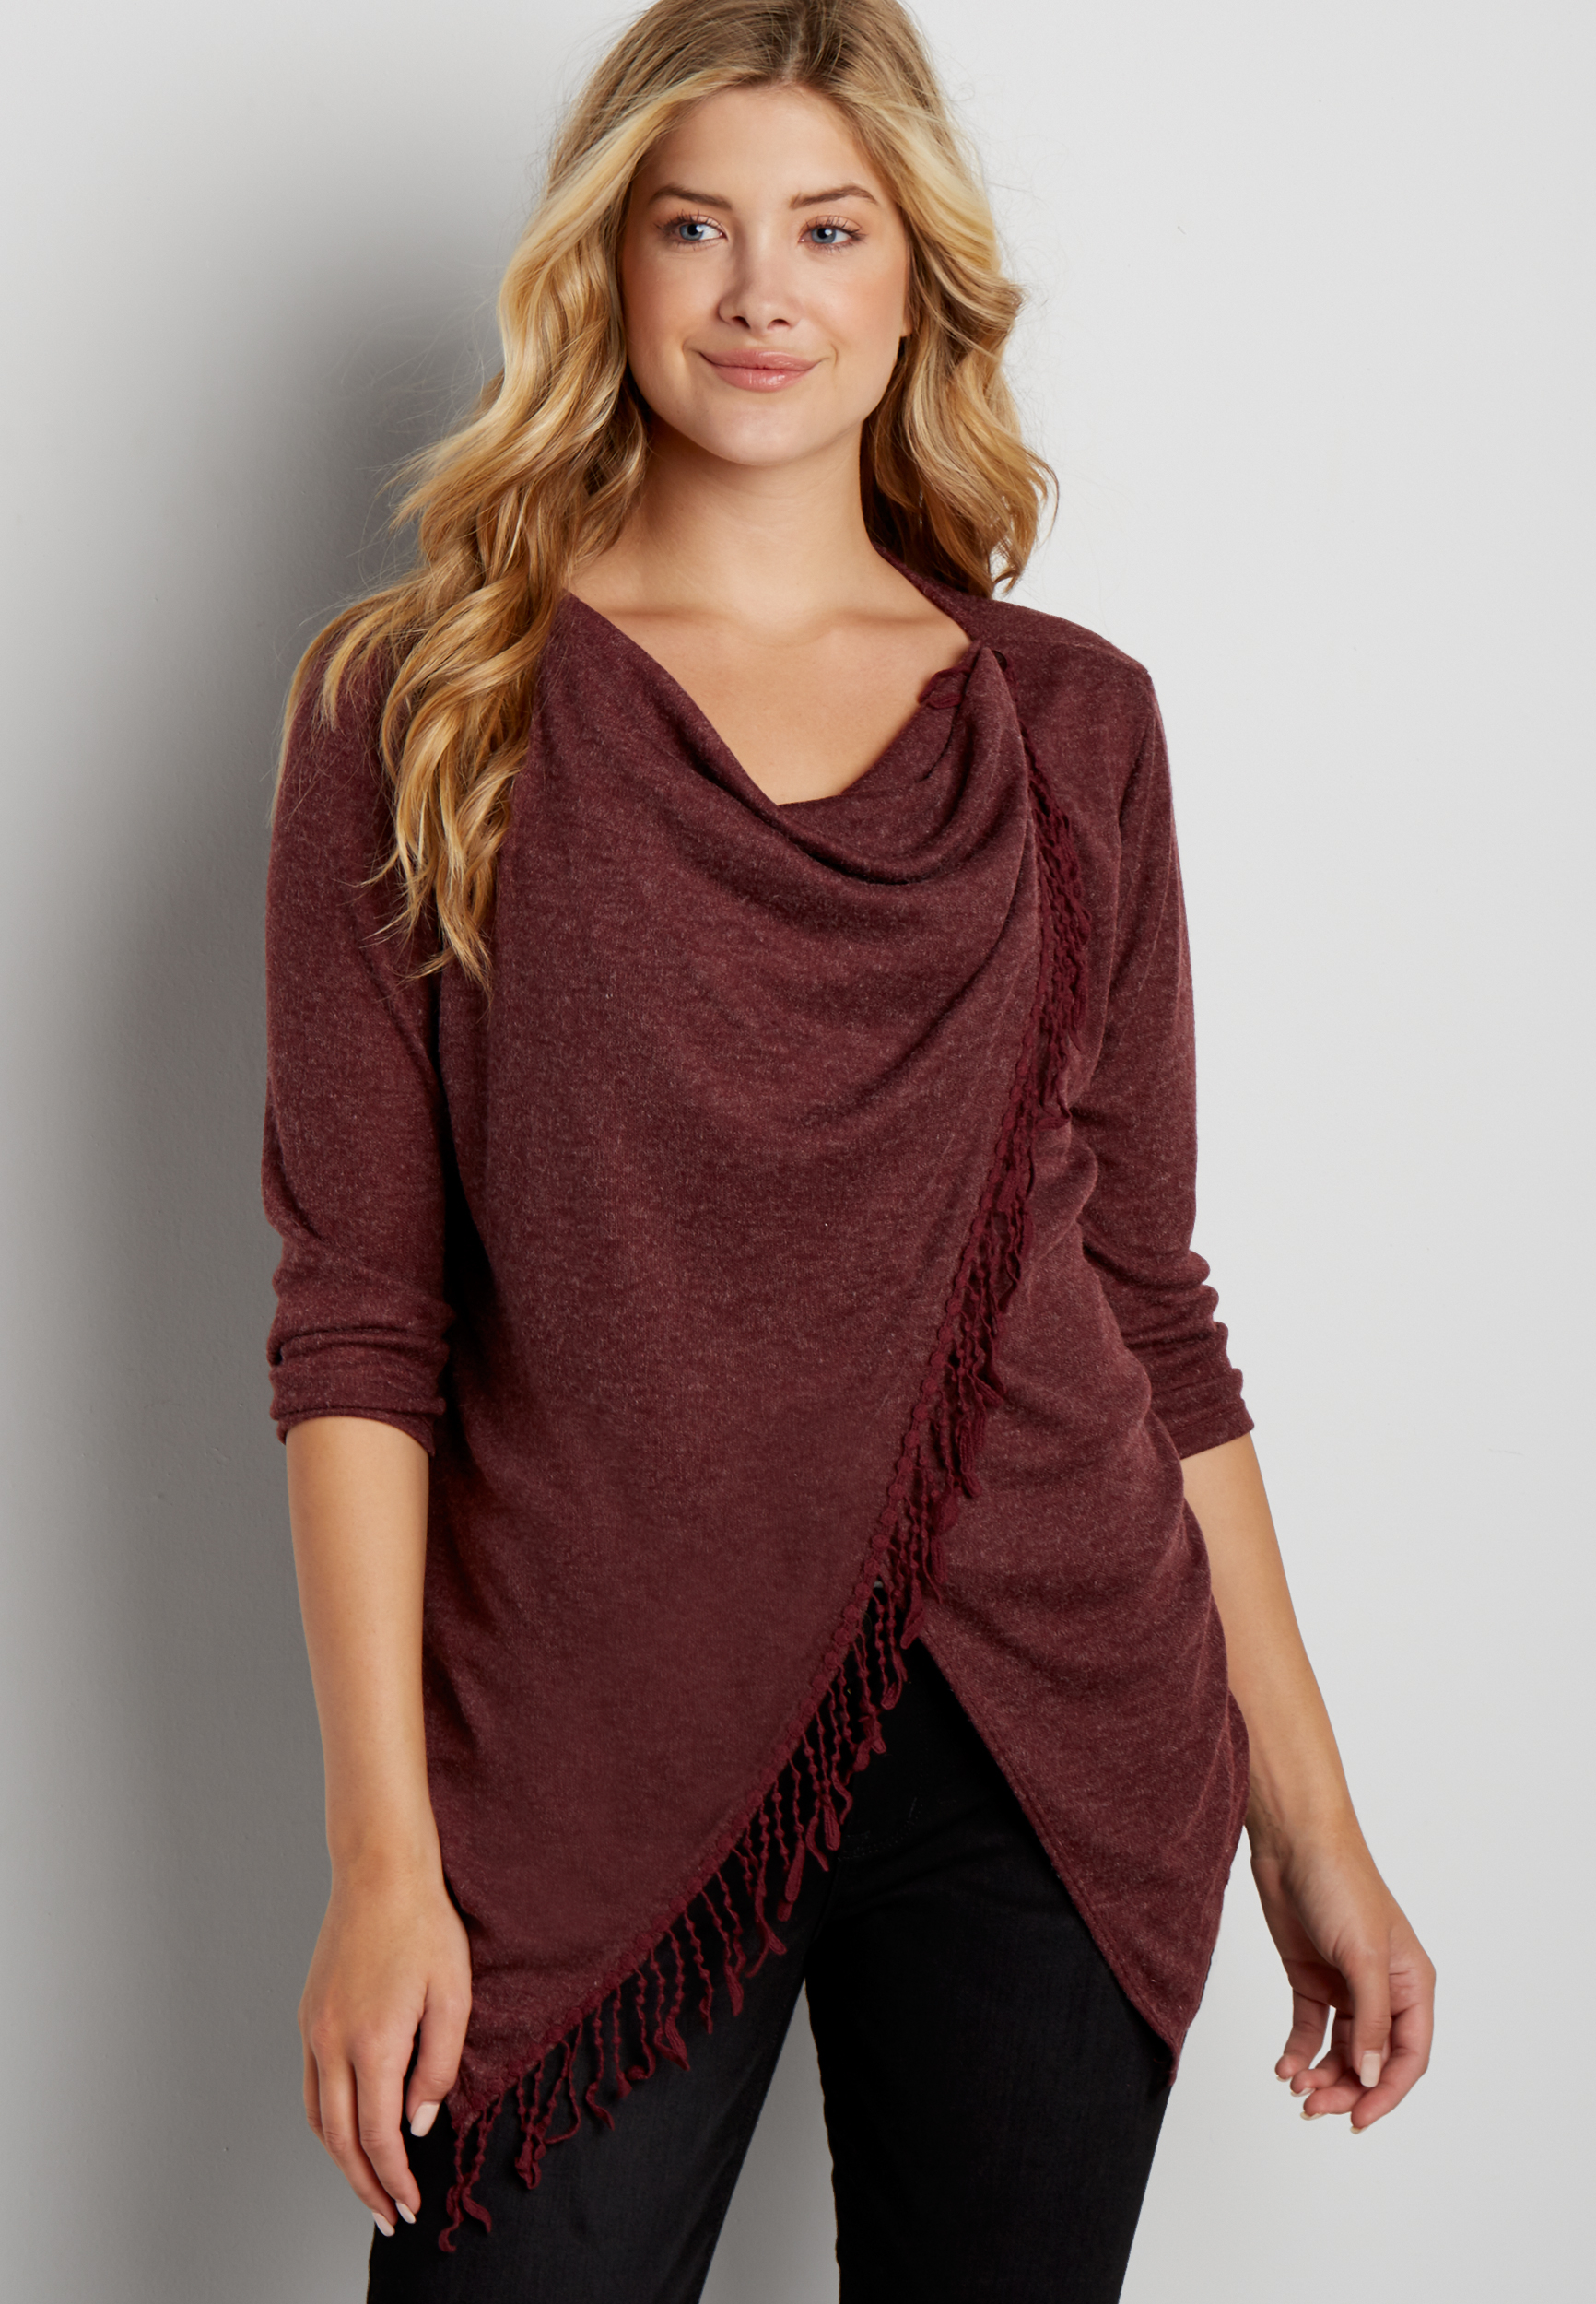 cardigan with asymmetrical button front and crocheted fringe | maurices